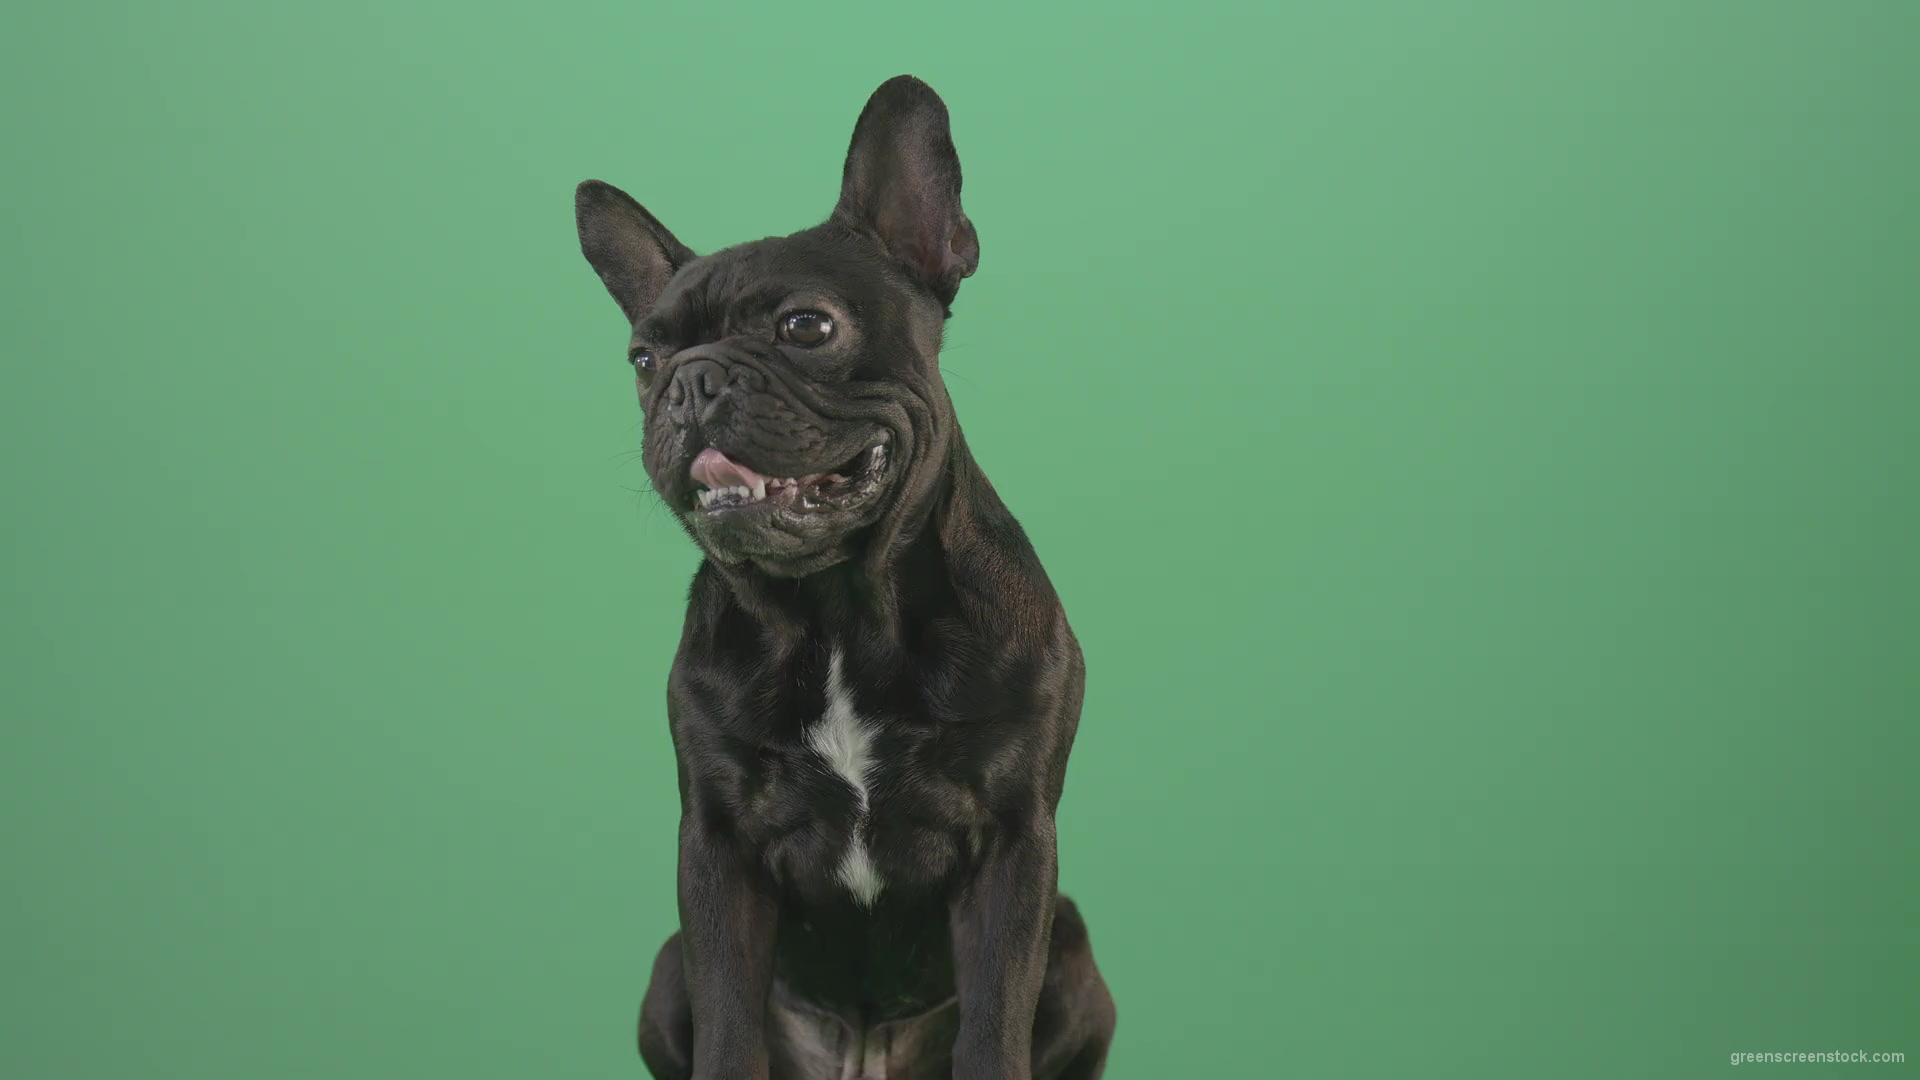 Hard-breathing-french-black-bull-dog-over-green-screen-4K-Video-Footage-1920_001 Green Screen Stock